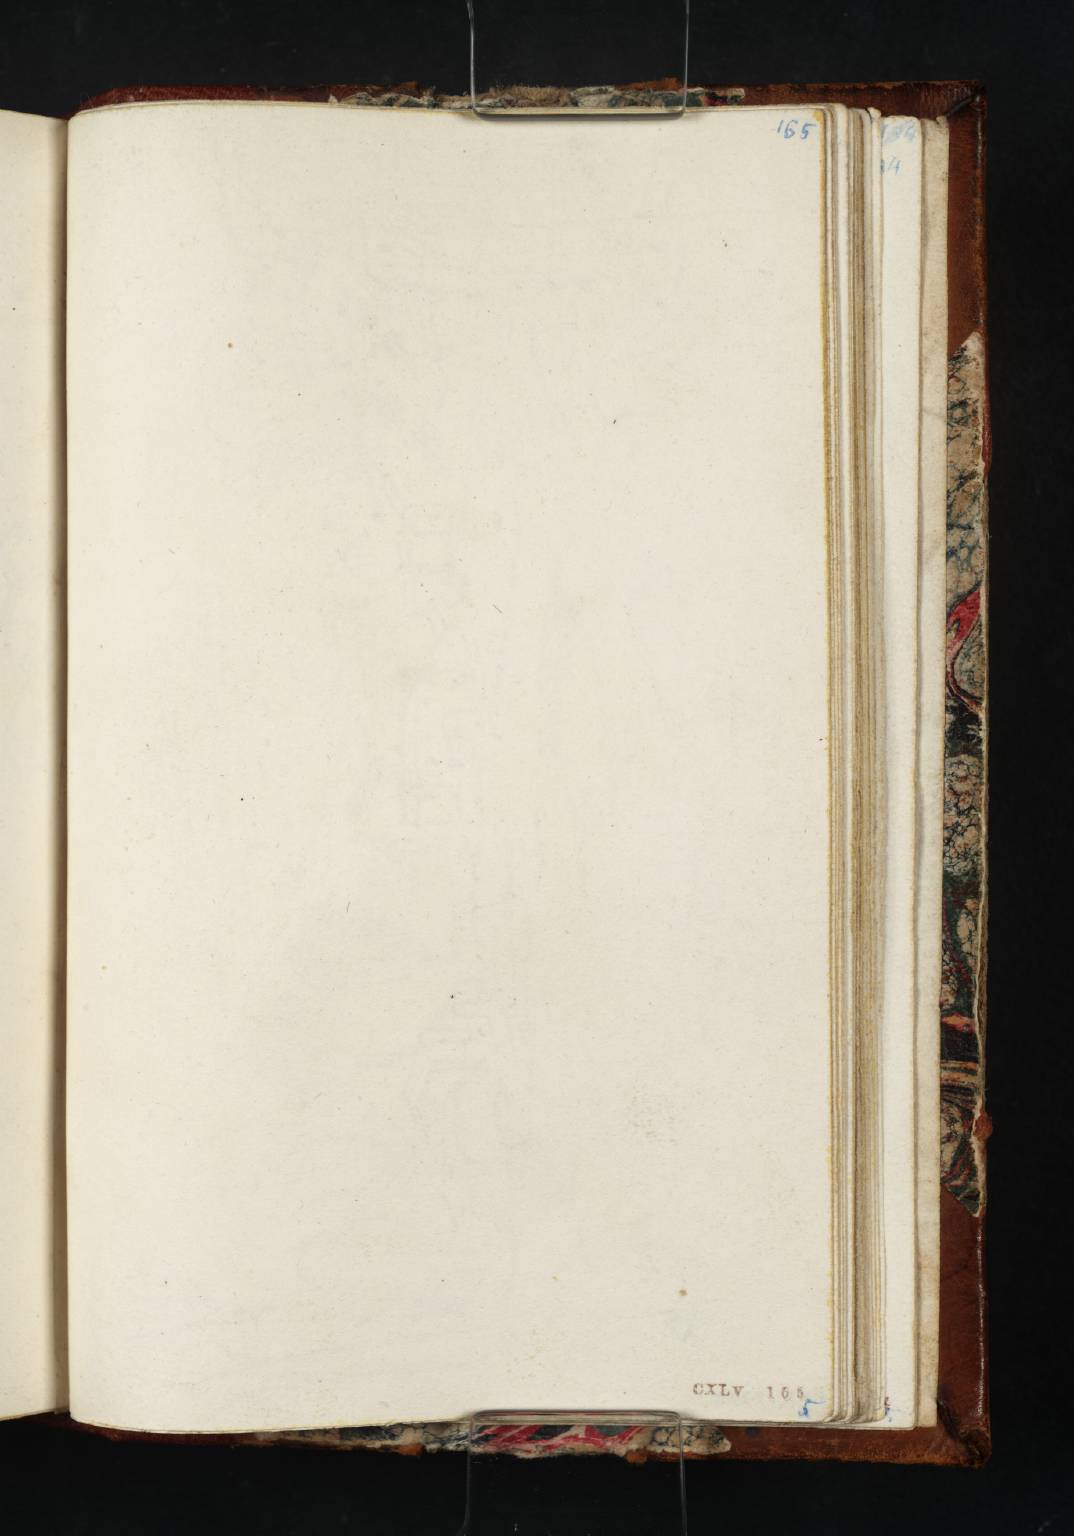 Joseph Mallord William Turner, 'Blank' (J.M.W. Turner: Sketchbooks,  Drawings and Watercolours)